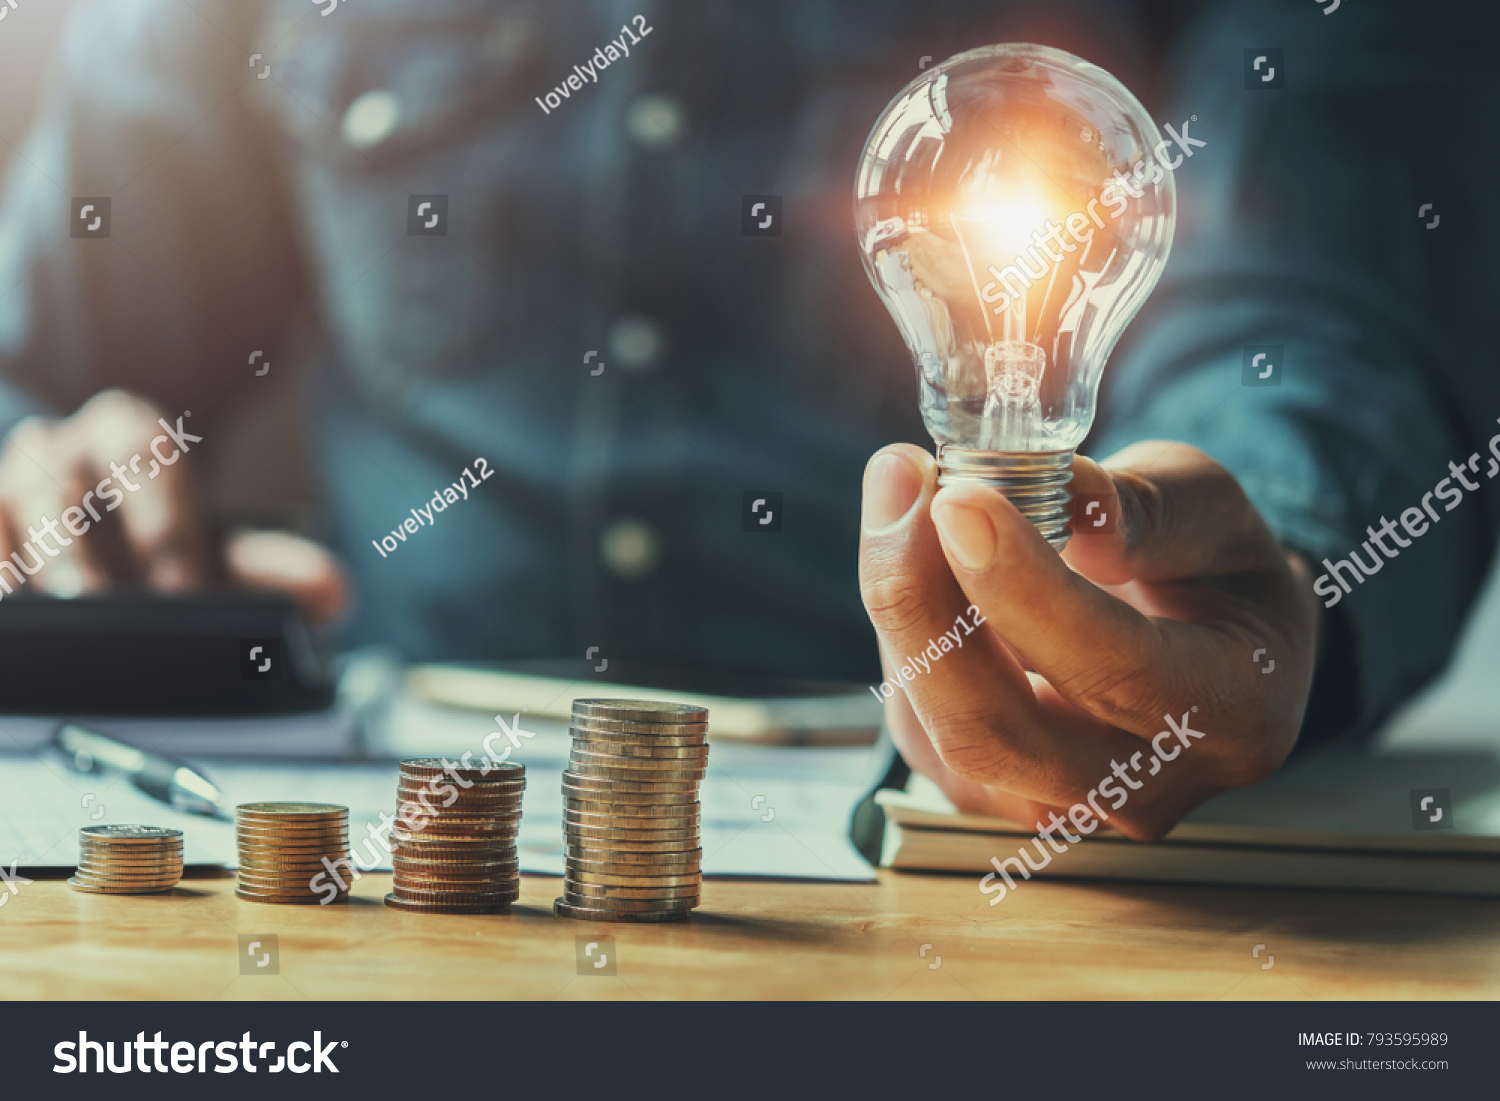 business man hand holding lightbulb with using calculator to calculate and money stack. idea saving energy and accounting finance in office concept #793595989